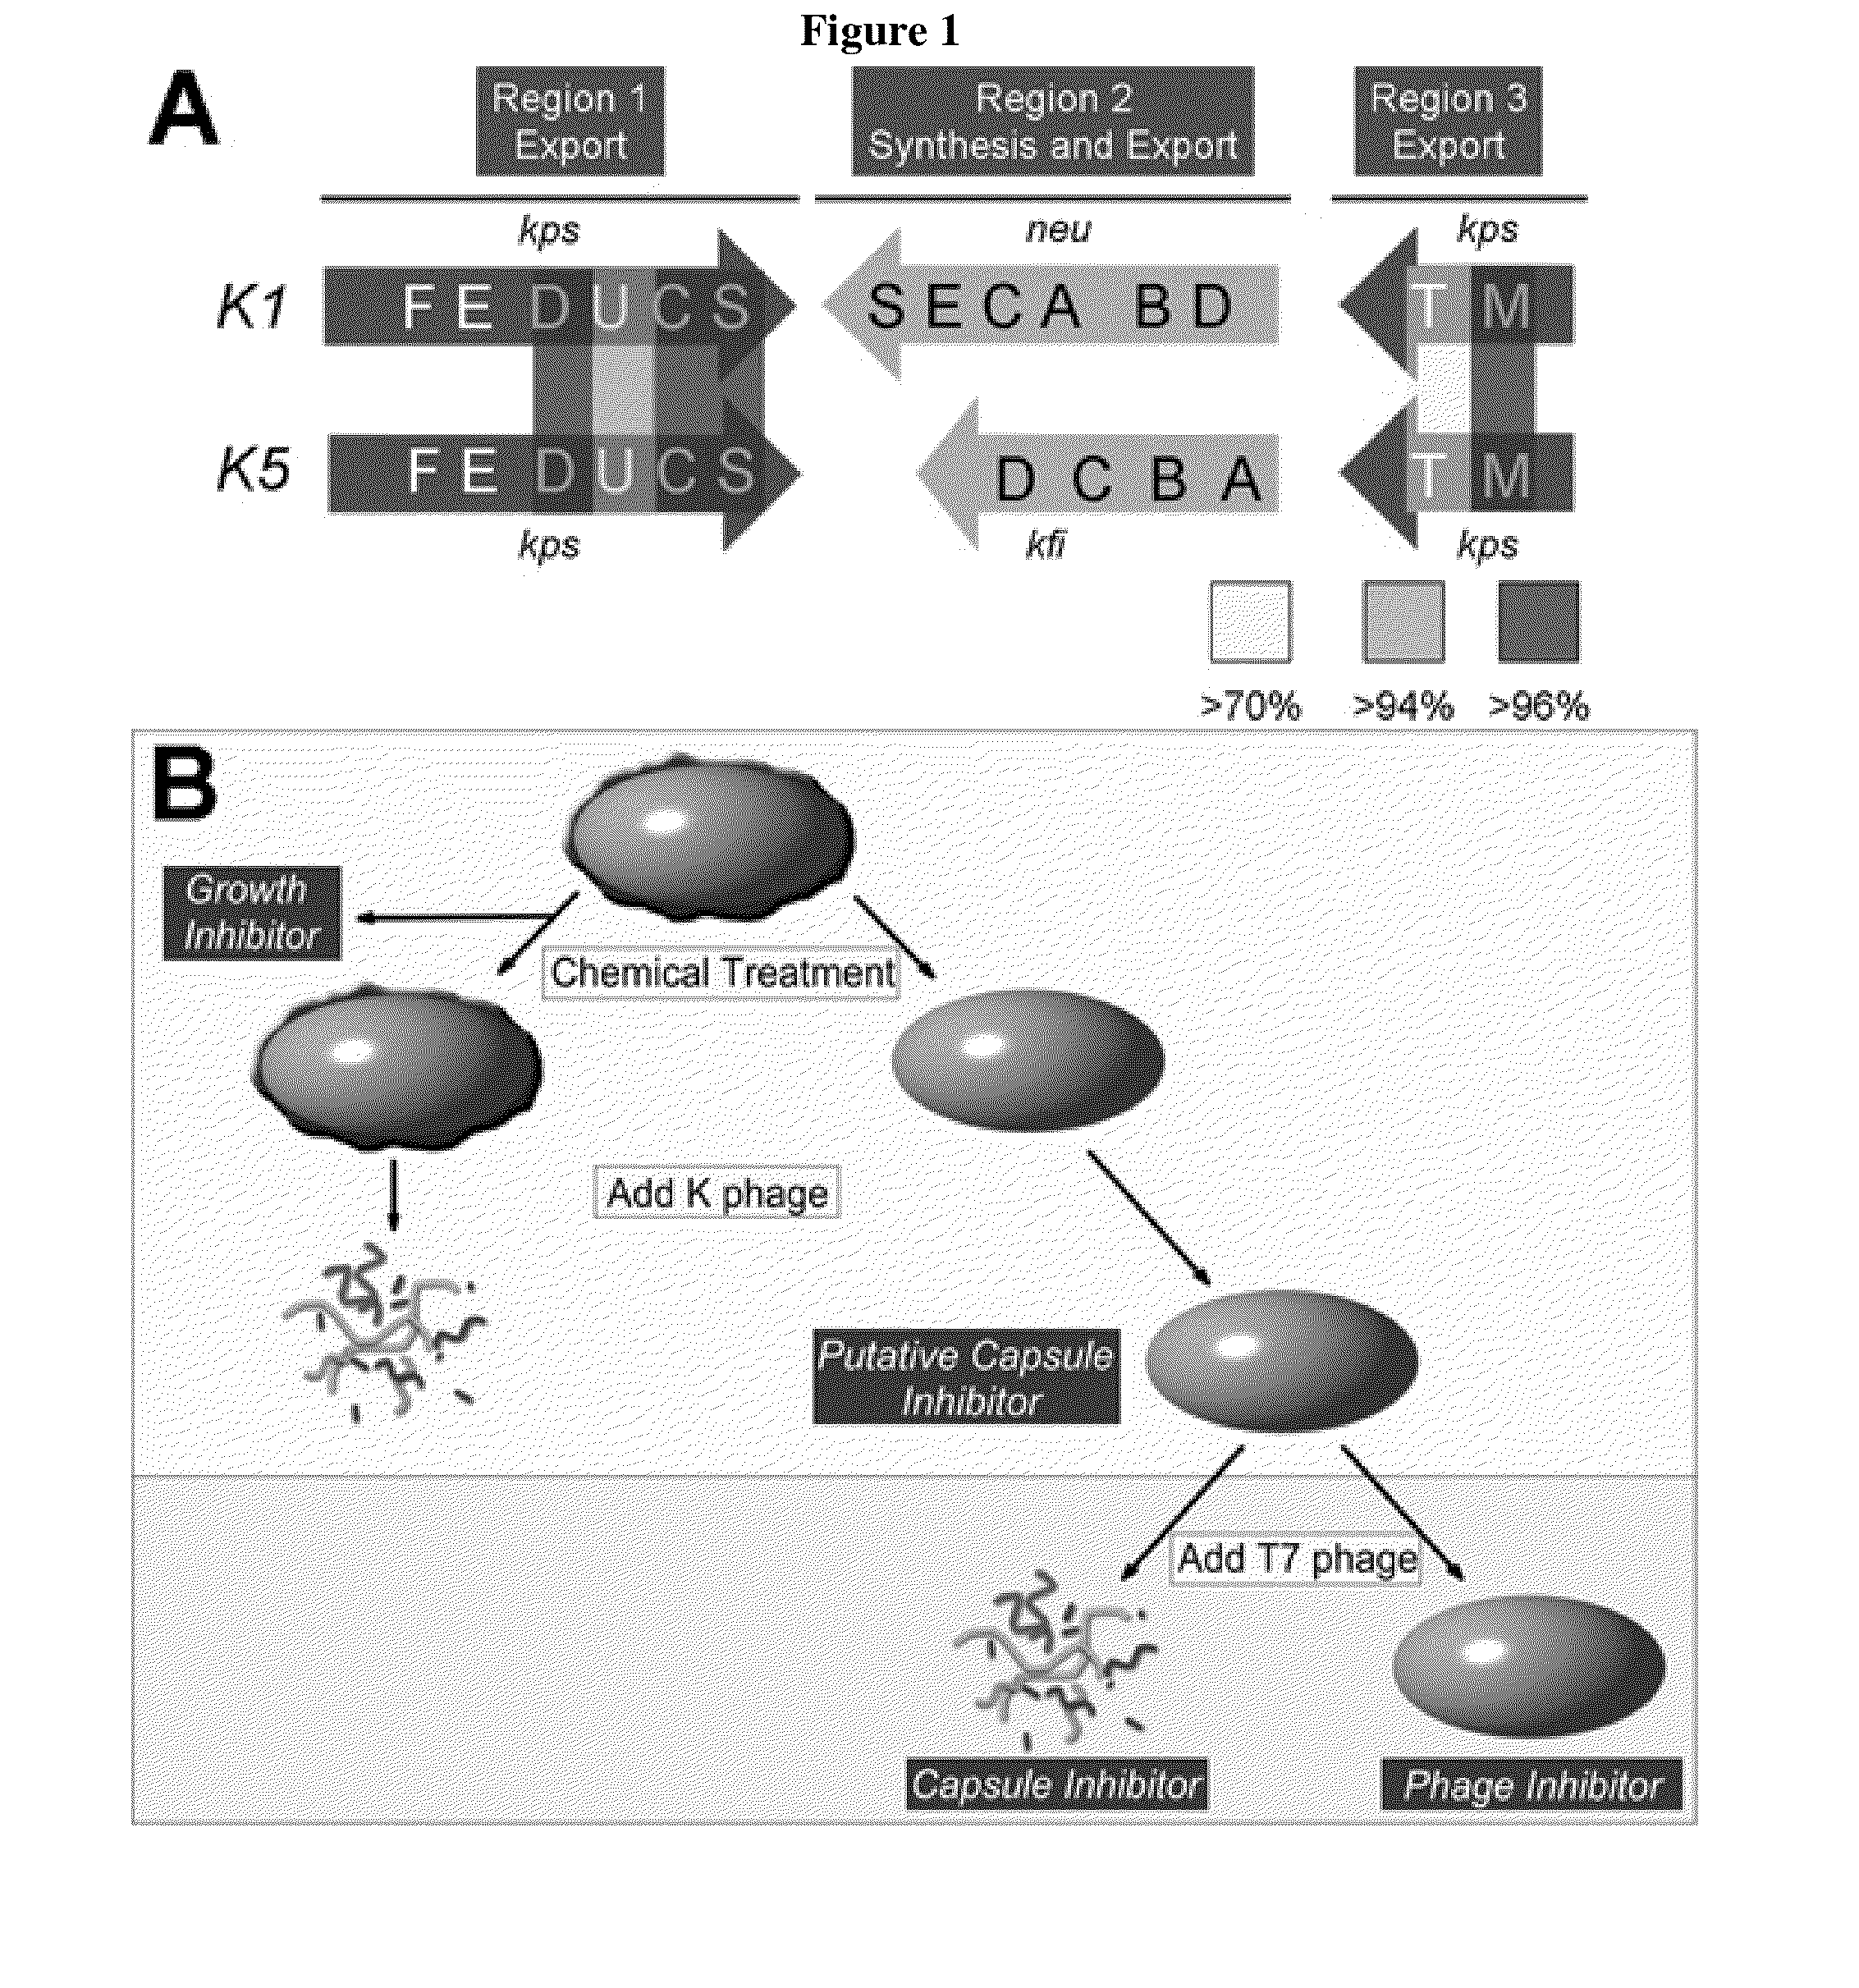 Ethoxyphenyl thienyl compounds and methods for the treatment of
bacterial infections